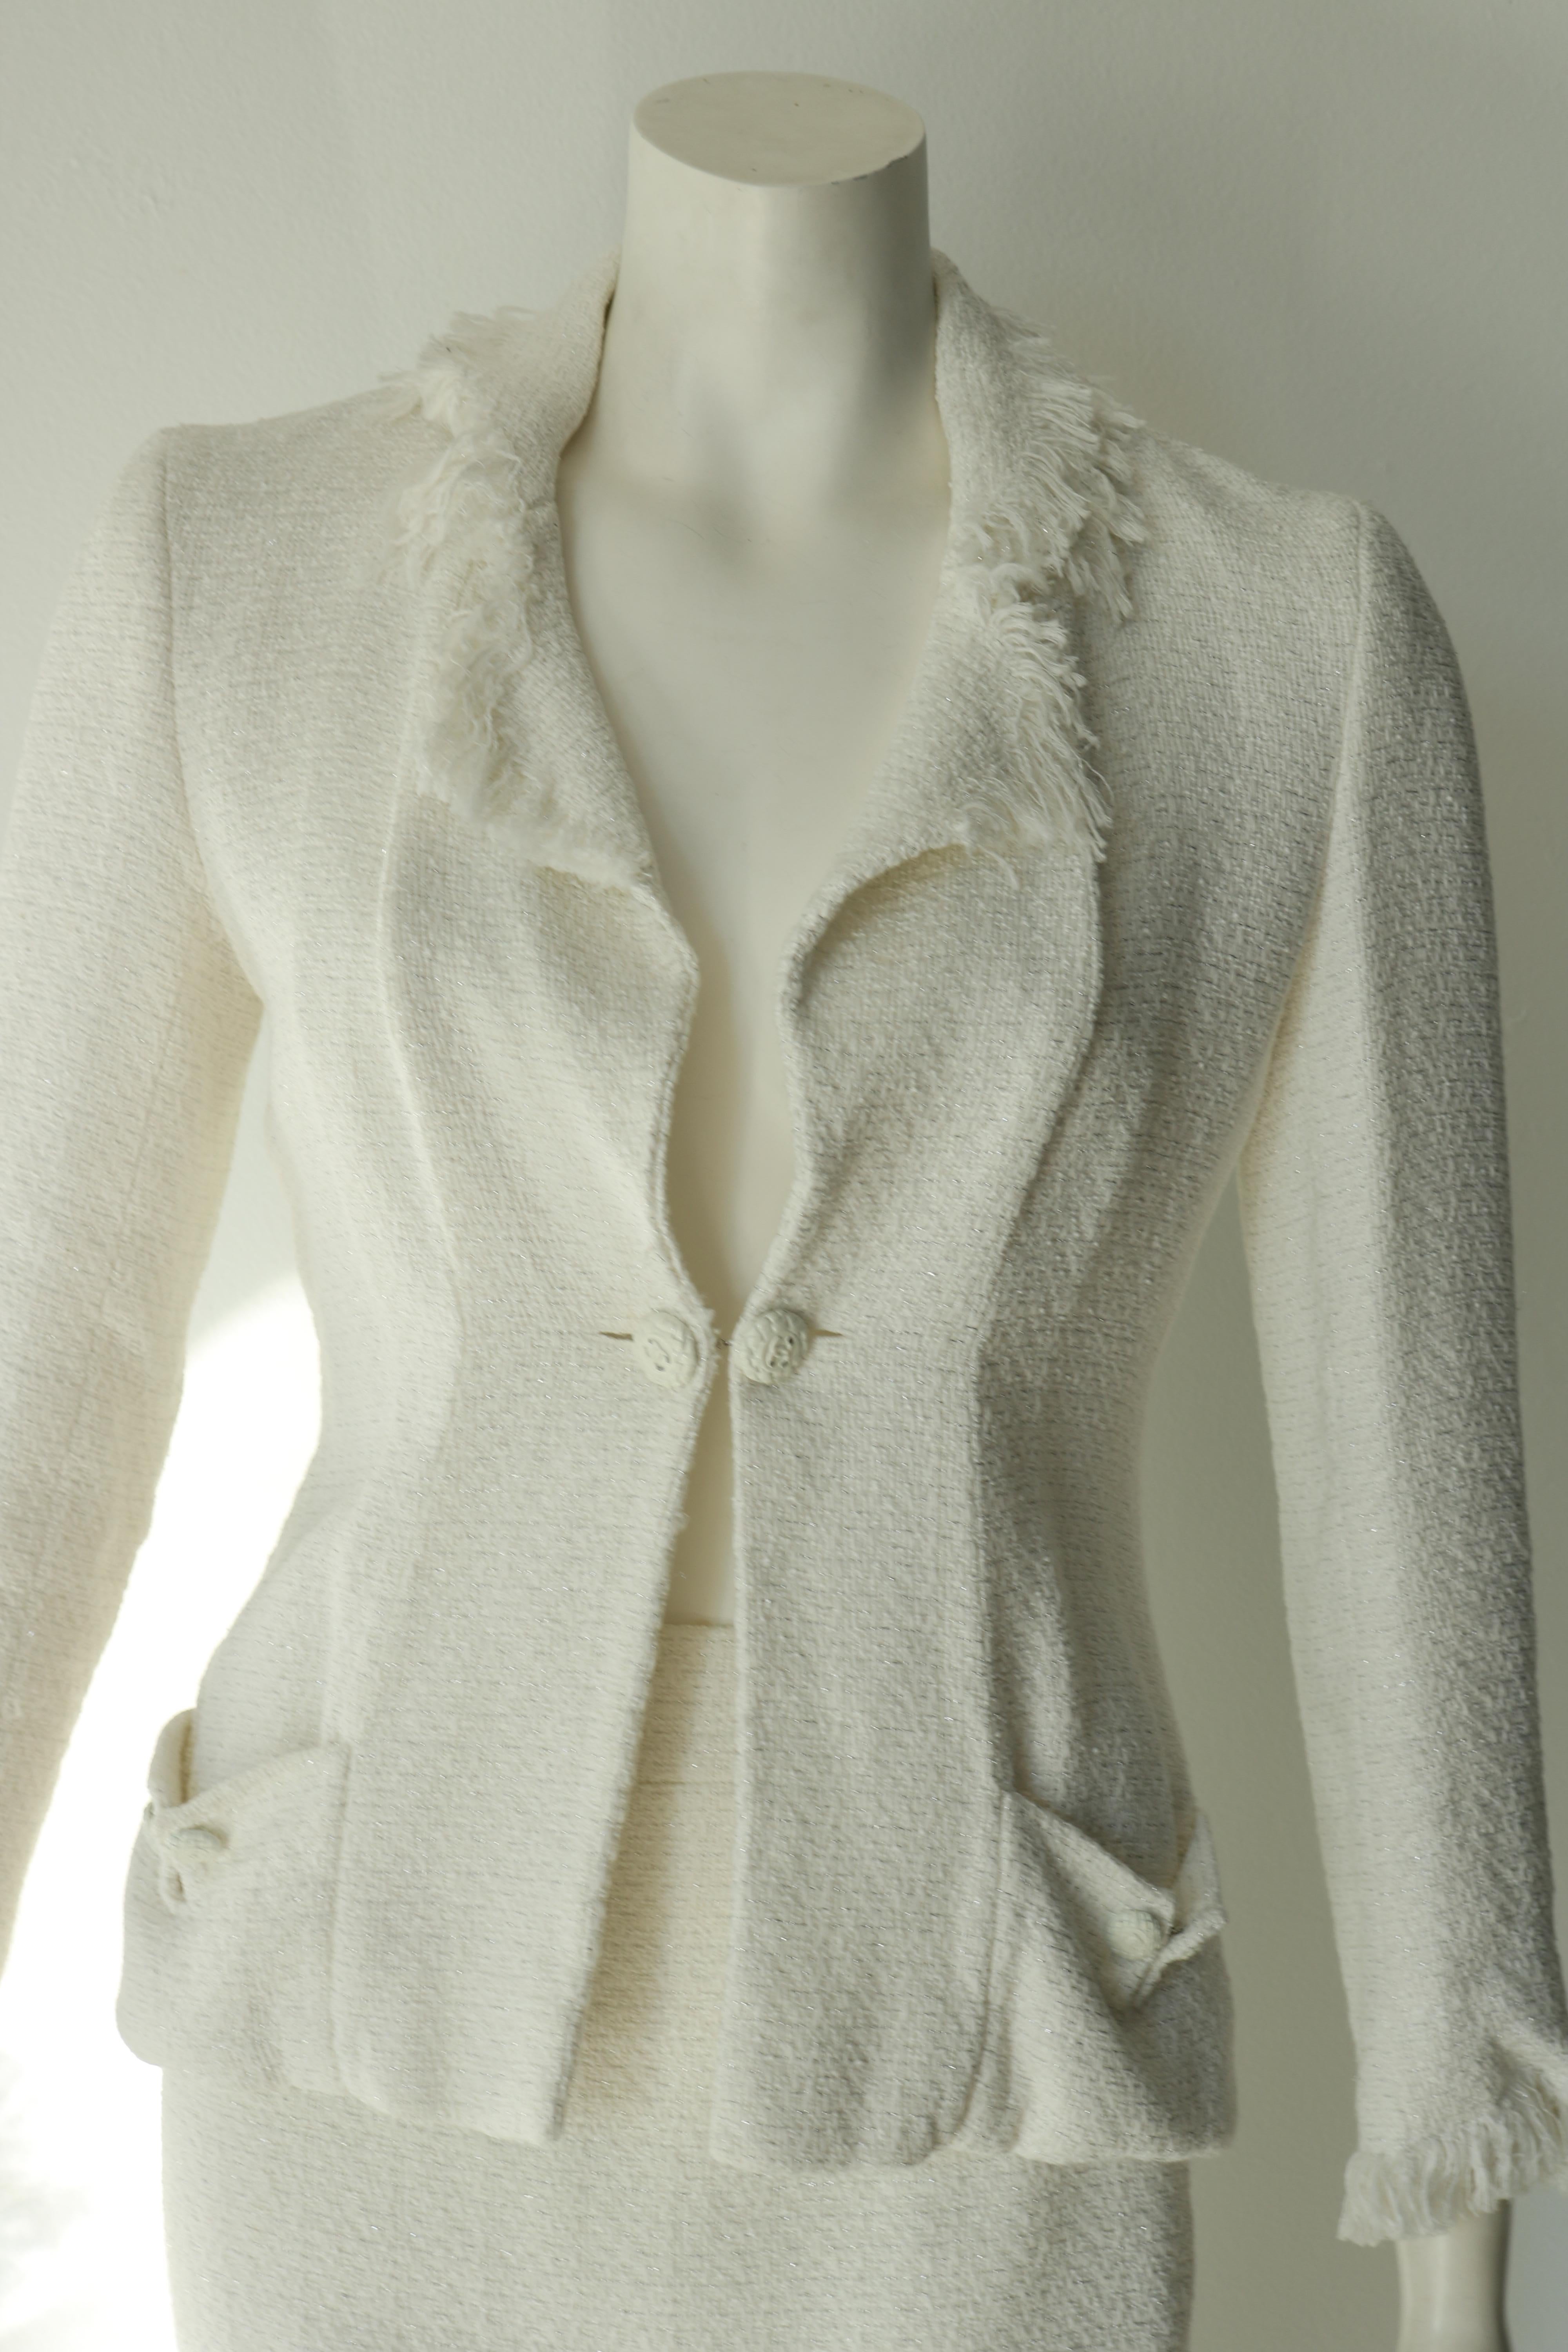 Stunning and classy Chanel skirt suit. 
The tweed is white with silver detail.
Size 40
Made in France 